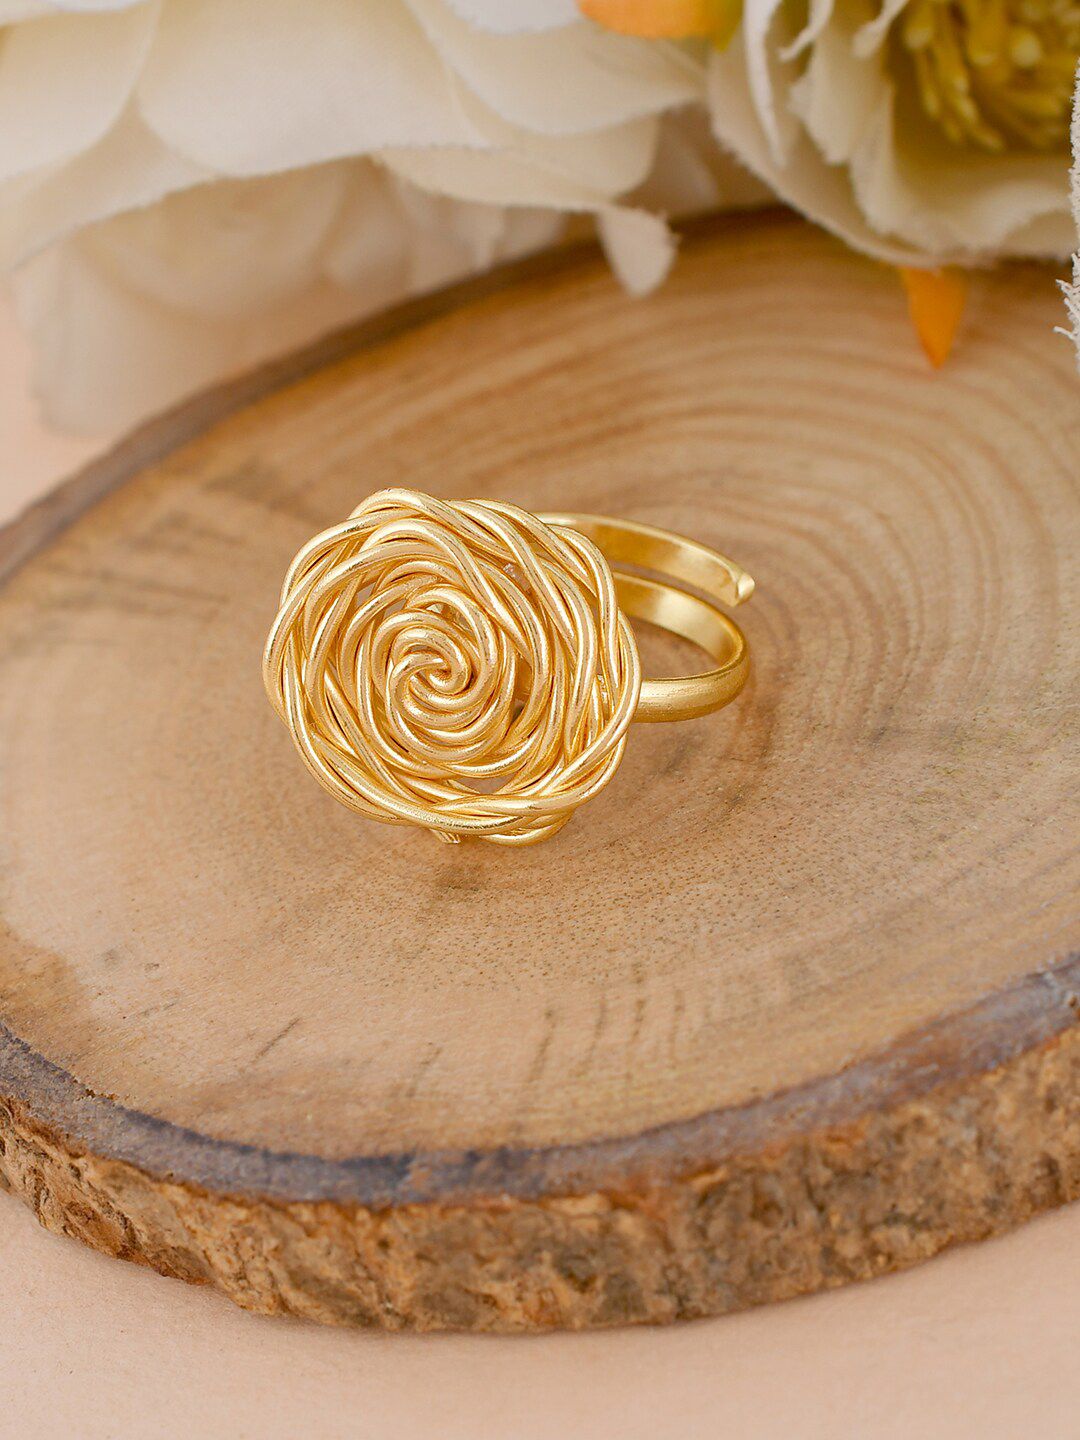 Silvermerc Designs Gold-Plated Meshwire Rose Handcrafted Adjustable Finger Ring Price in India